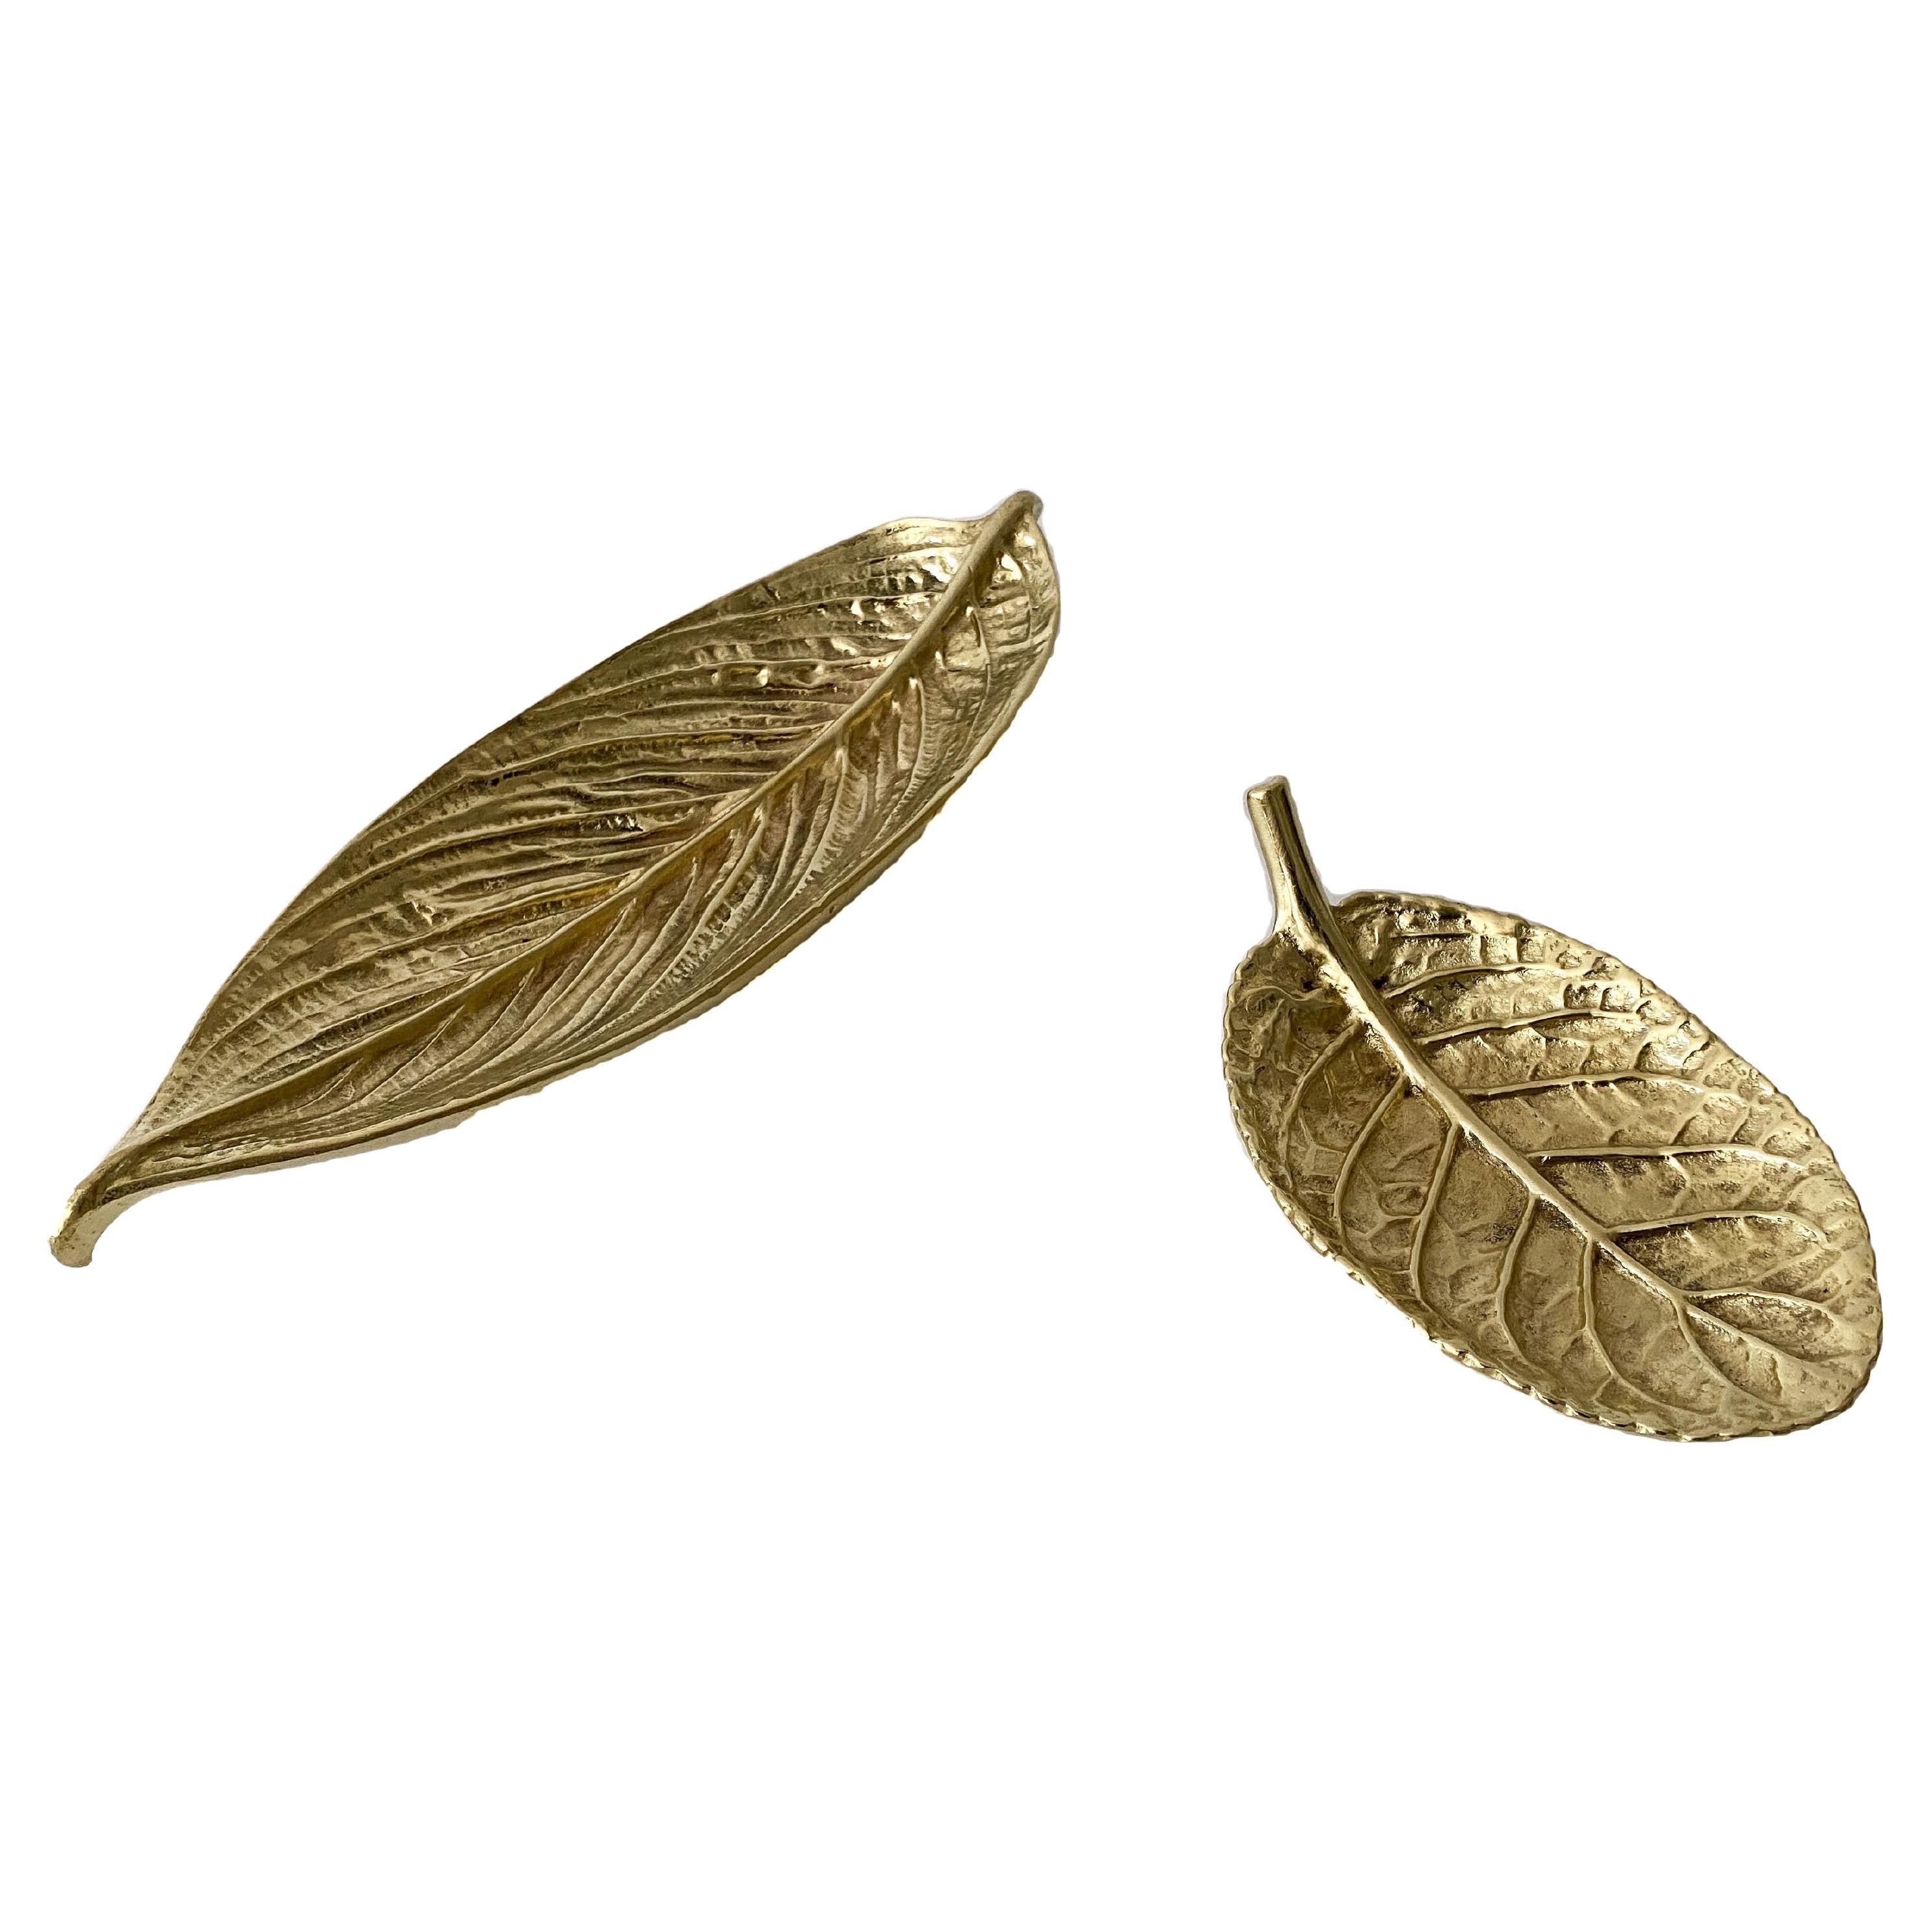 Two Vintage Virginia Metalcrafters Solid Brass Leaves, Gloxinia and Calathea For Sale